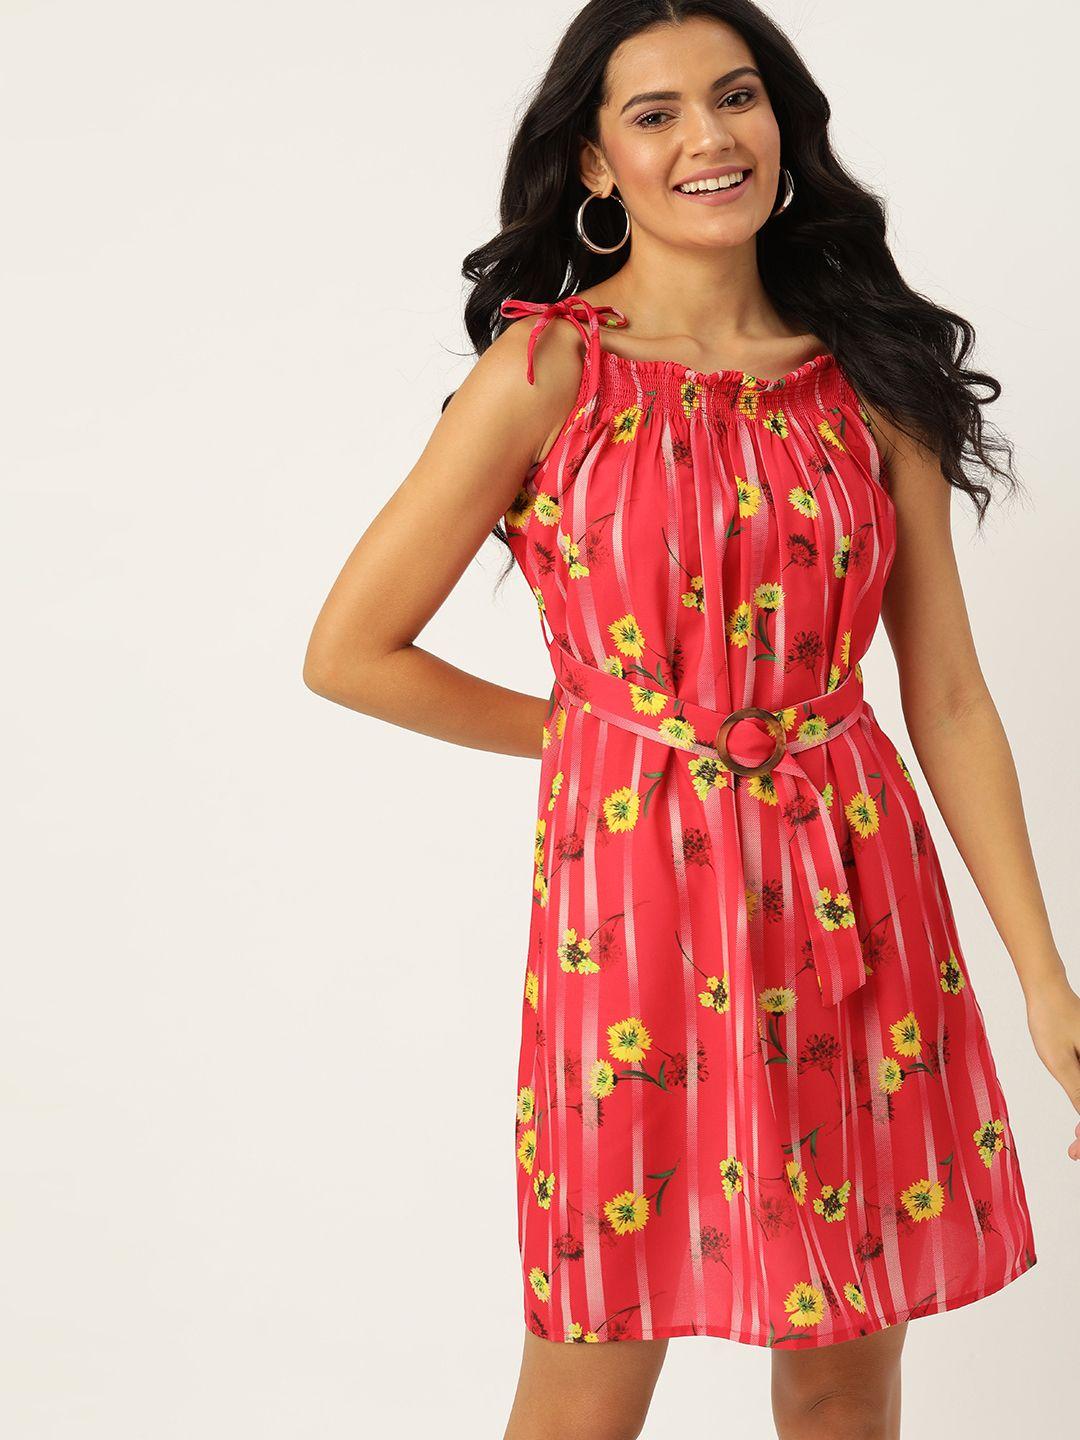 dressberry women pink & yellow floral printed a-line dress